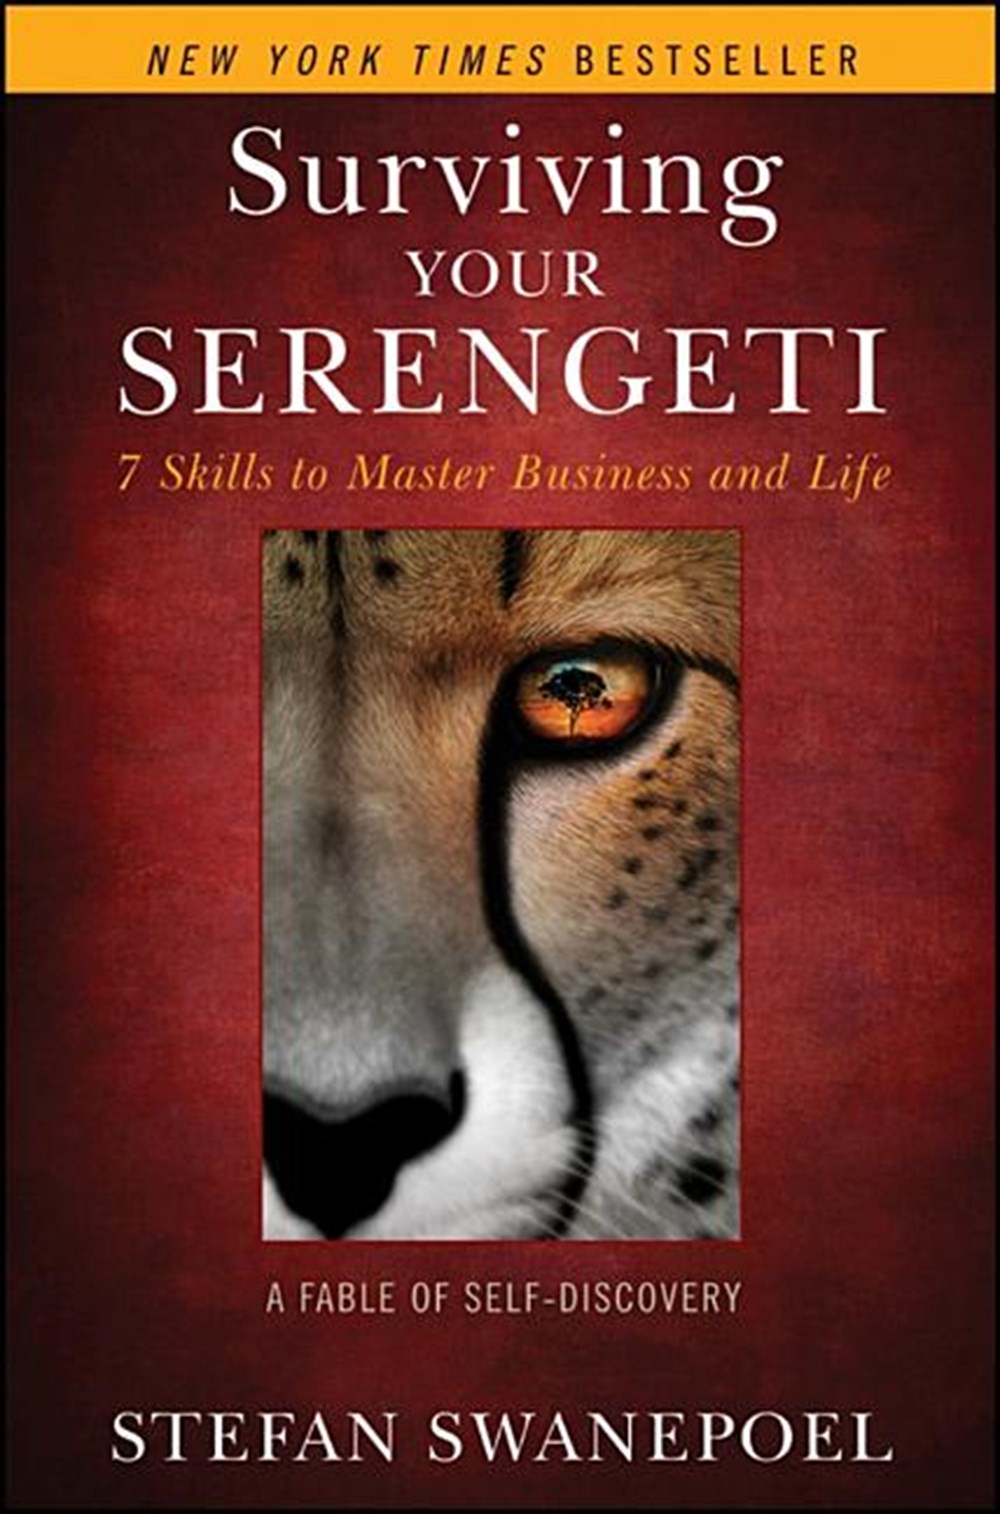 Surviving Your Serengeti 7 Skills to Master Business and Life: A Fable of Self-Discovery